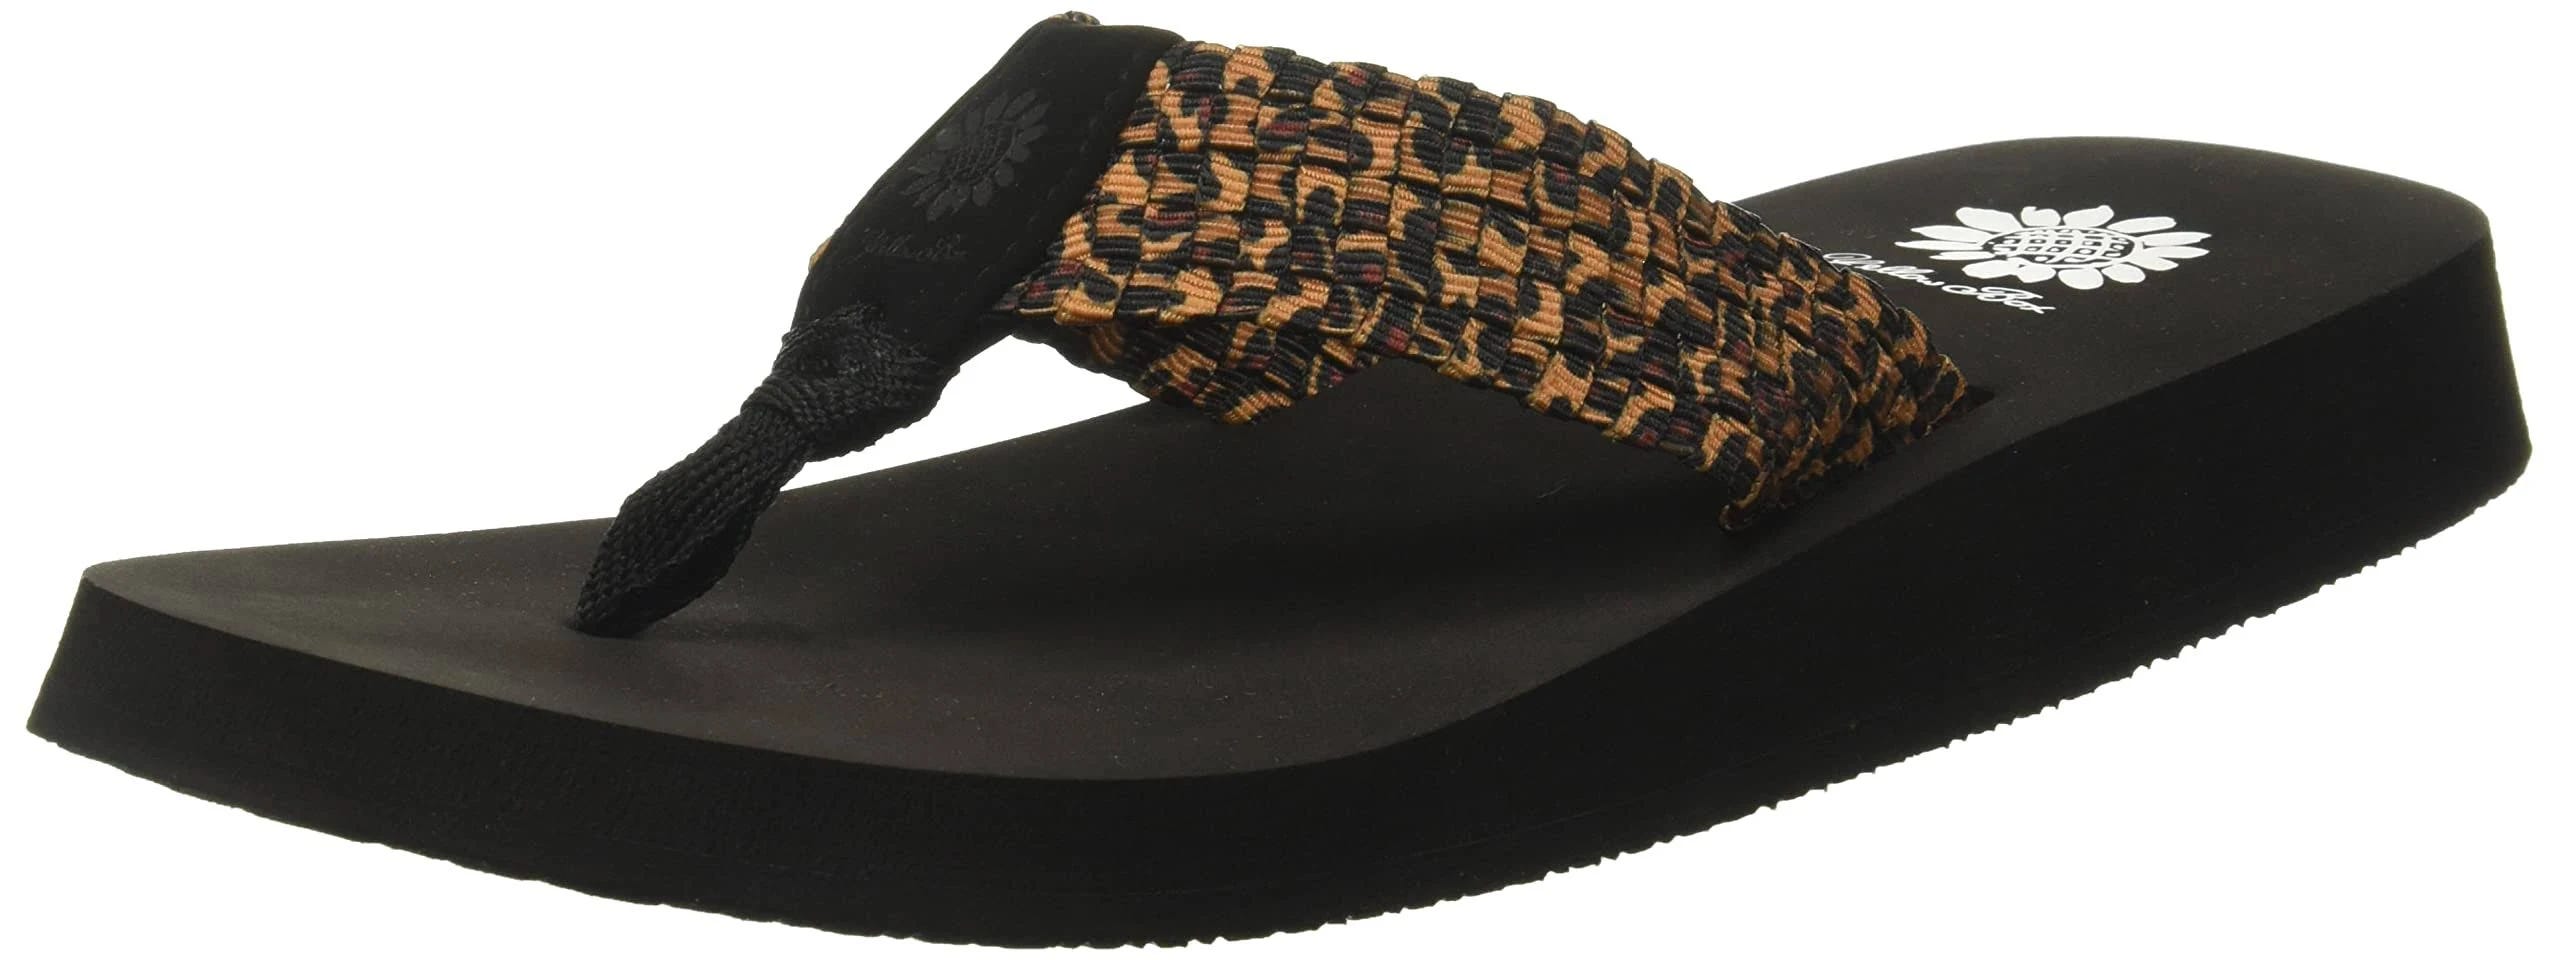 Stylish Leopard Print Sandal for Comfort and Durability | Image